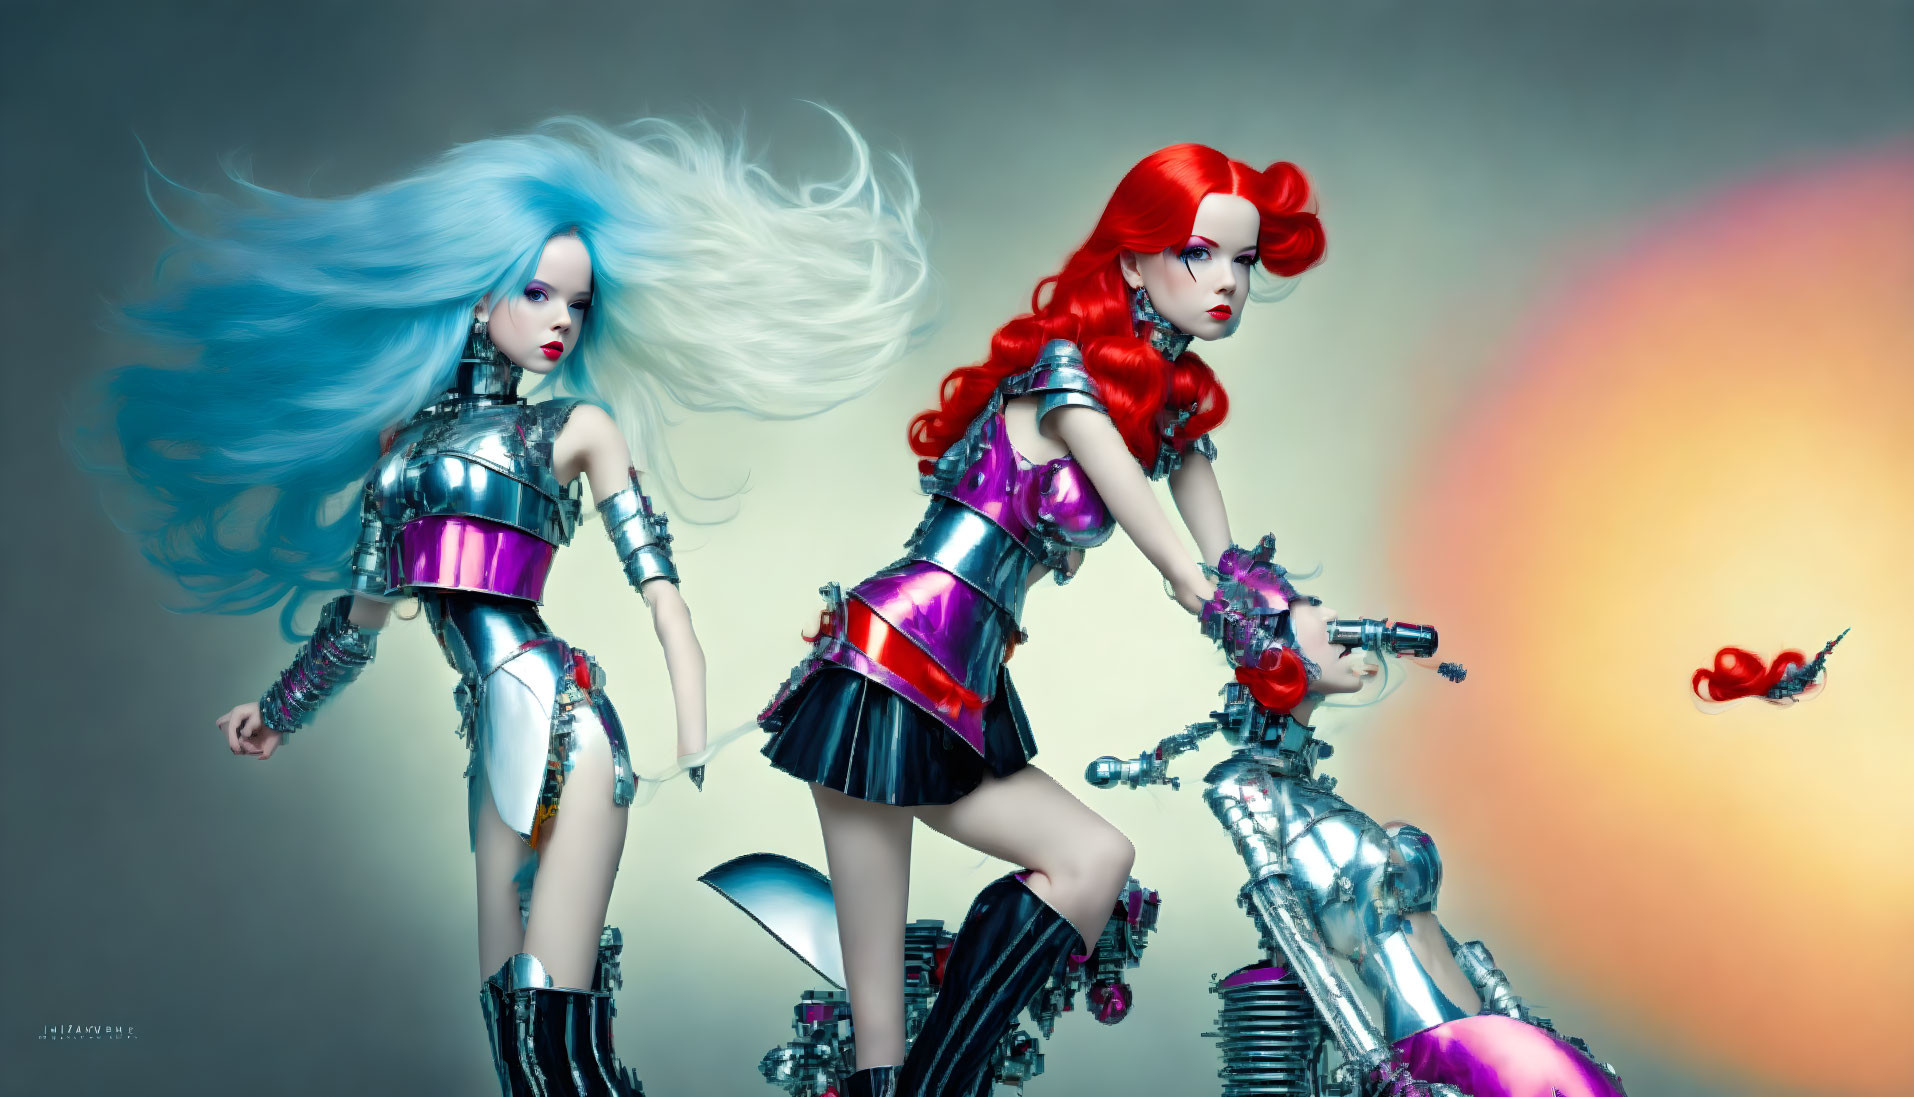 Futuristic female figures with blue and red hair, metallic outfits, and motorcycle with glowing orb effect